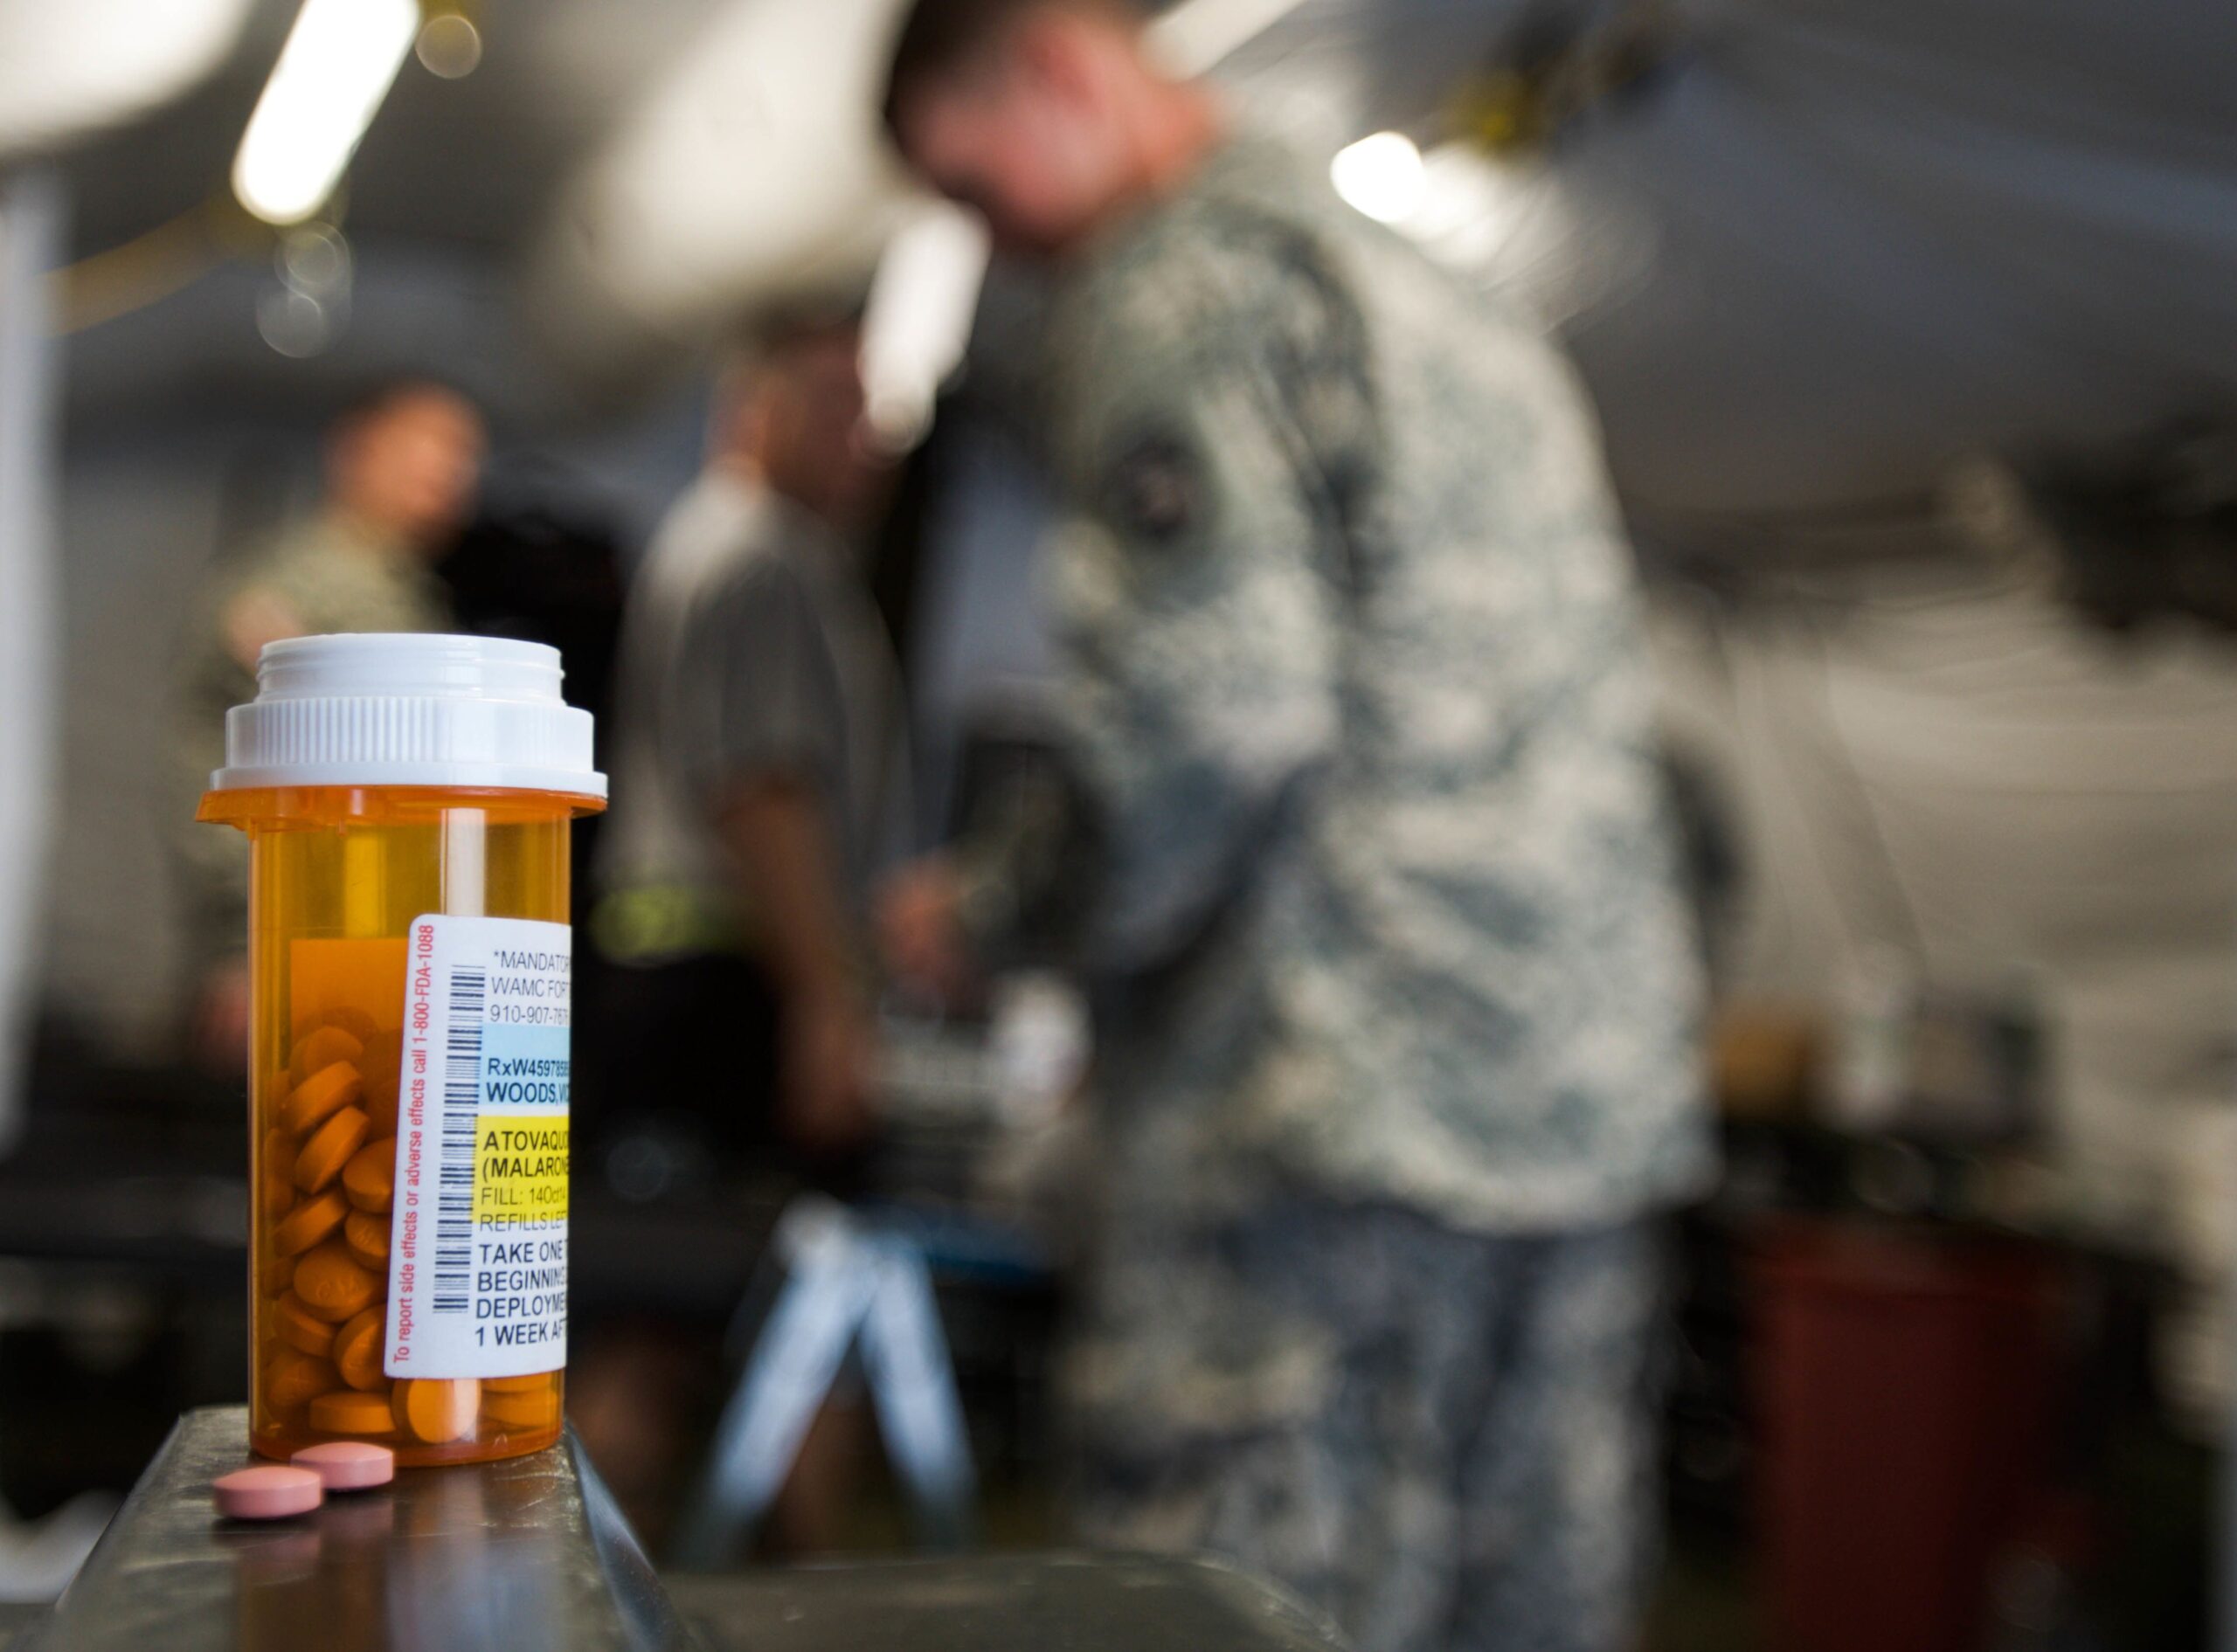 Can You Join The Military If You Take Medication?